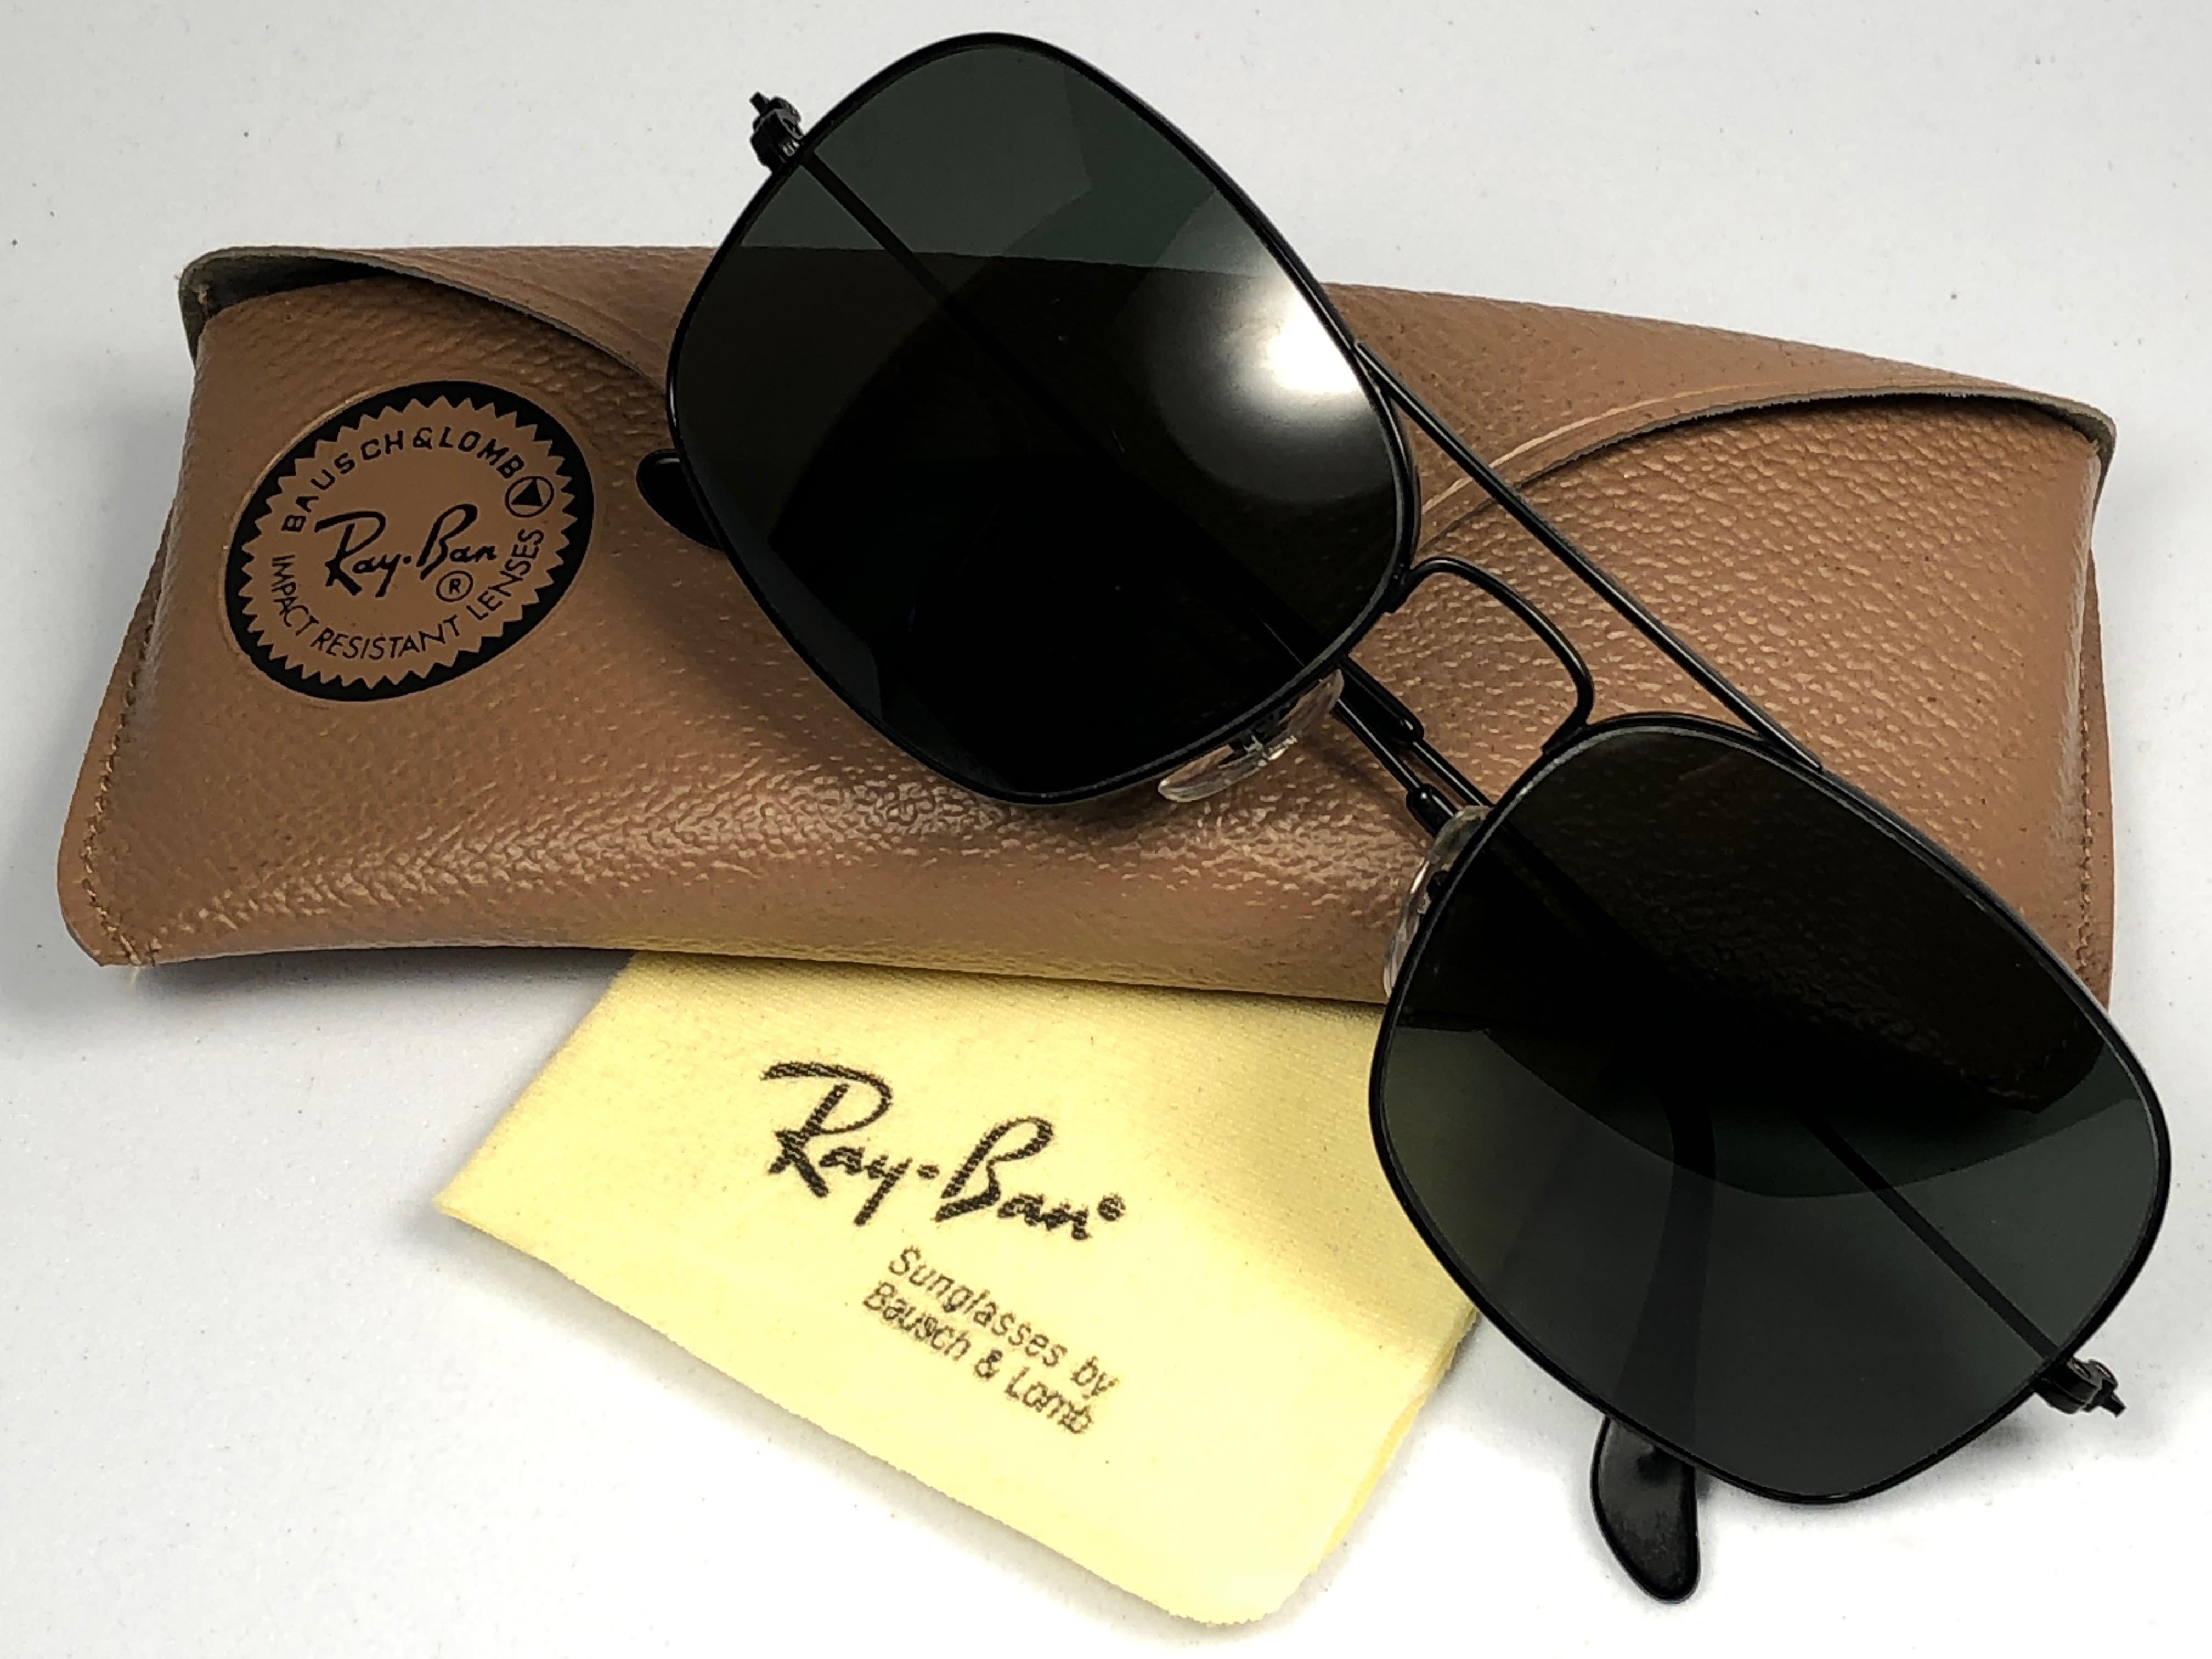 New Vintage Ray Ban Avalar black with G15 grey lenses. B&L etched in the lenses, so mid 1970's.  Please notice this item is nearly 50 years old and may show minor sign of wear.
Comes with its original Ray Ban B&L case.  A seldom piece in new, never